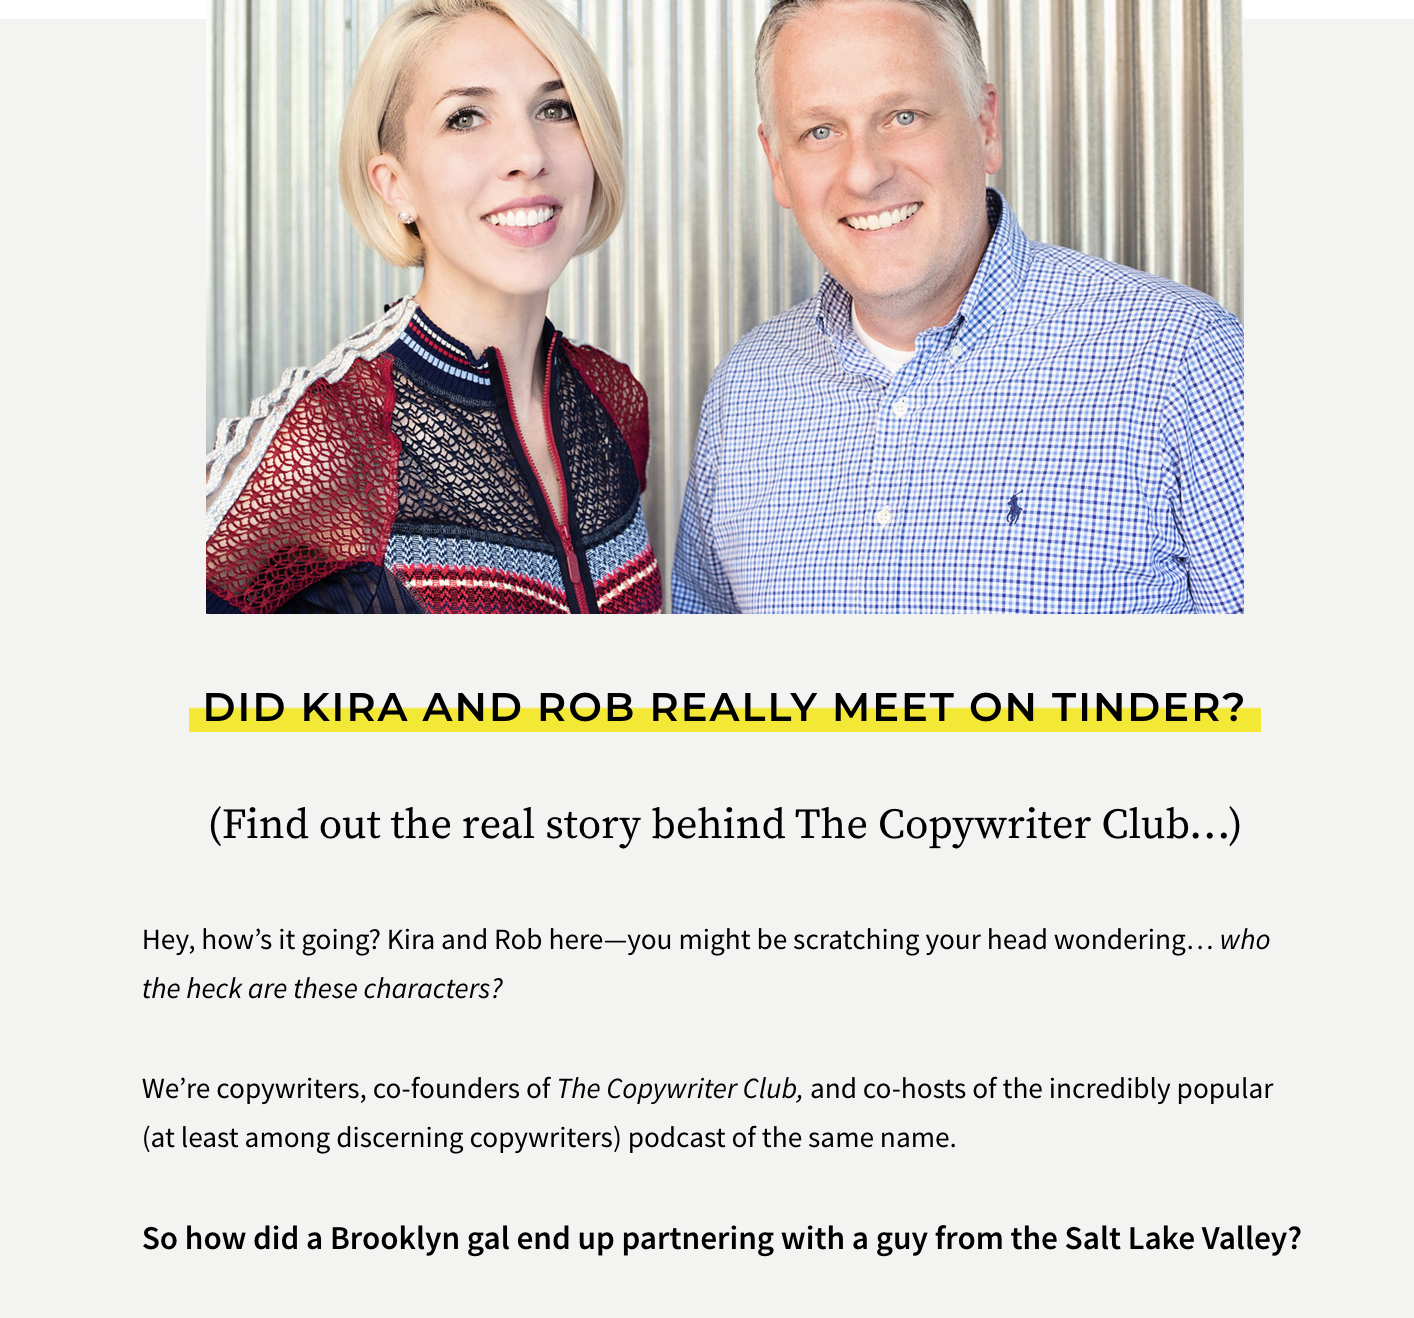 The Copywriter Club about